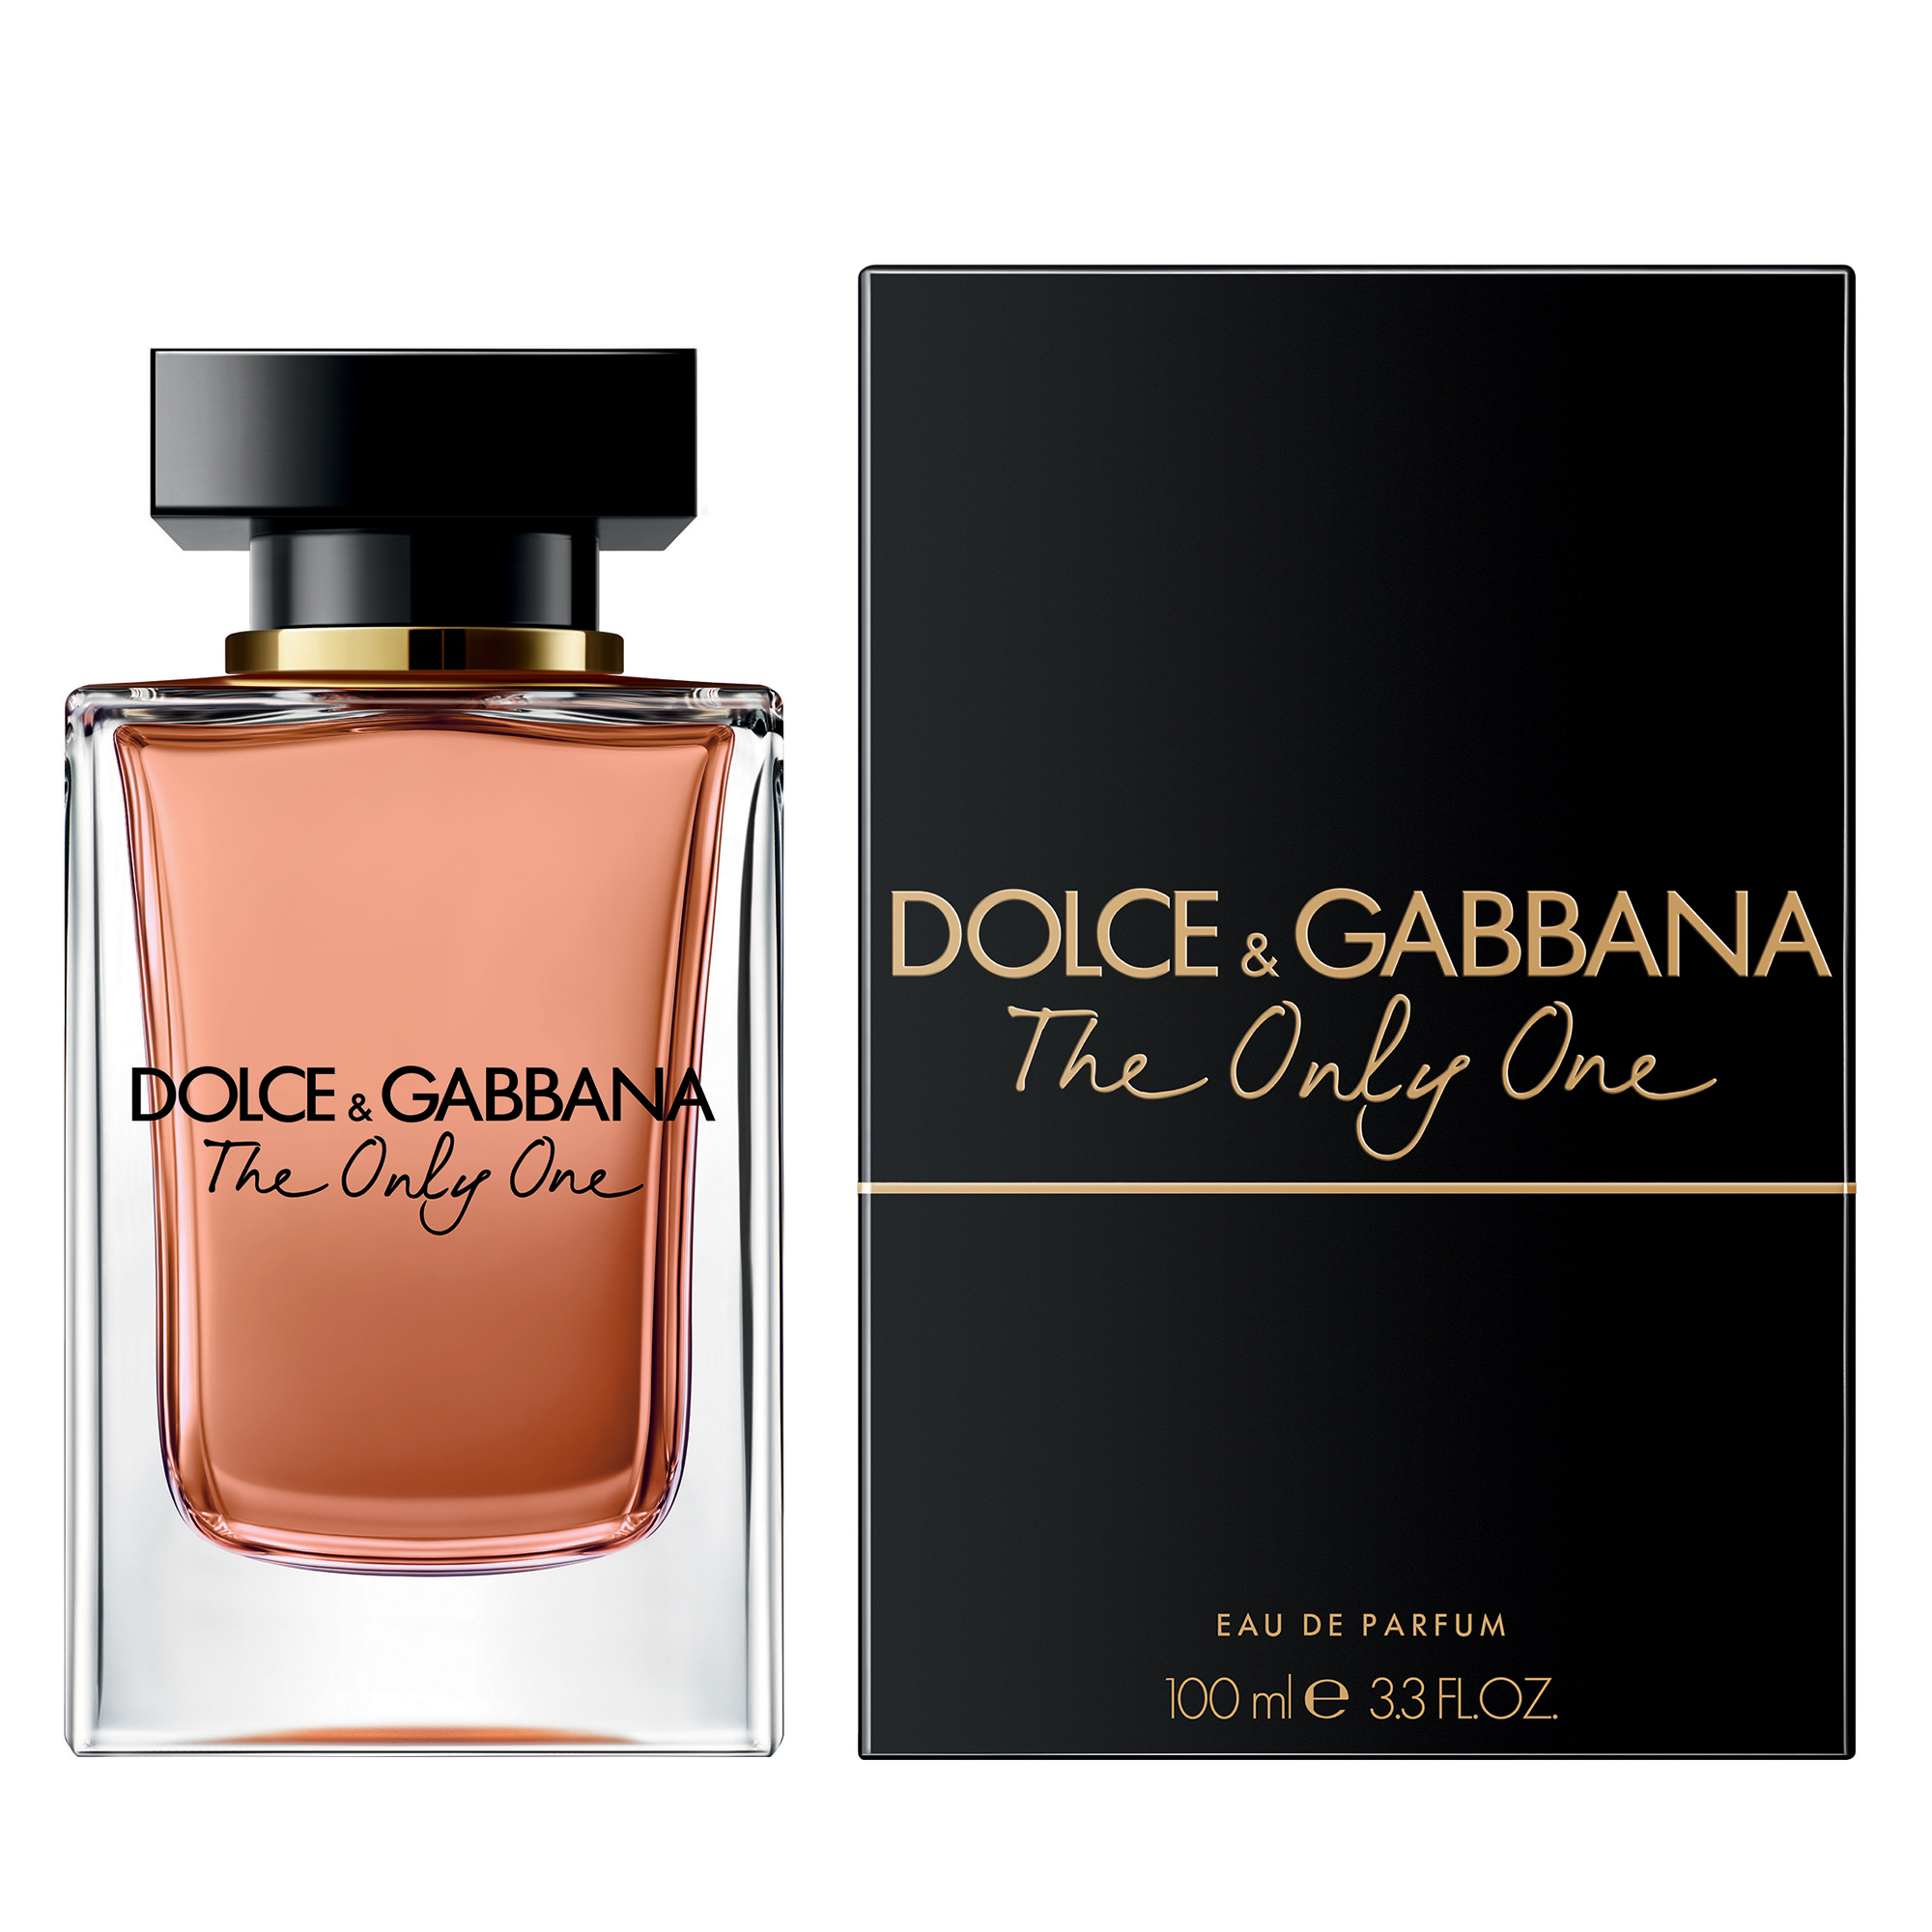 Духи dolce only one. Dolce & Gabbana the only one, EDP., 100 ml. Dolce & Gabbana the only one EDP 50 ml. Dolce Gabbana the only one 100ml. Dolce Gabbana the only one 50ml.